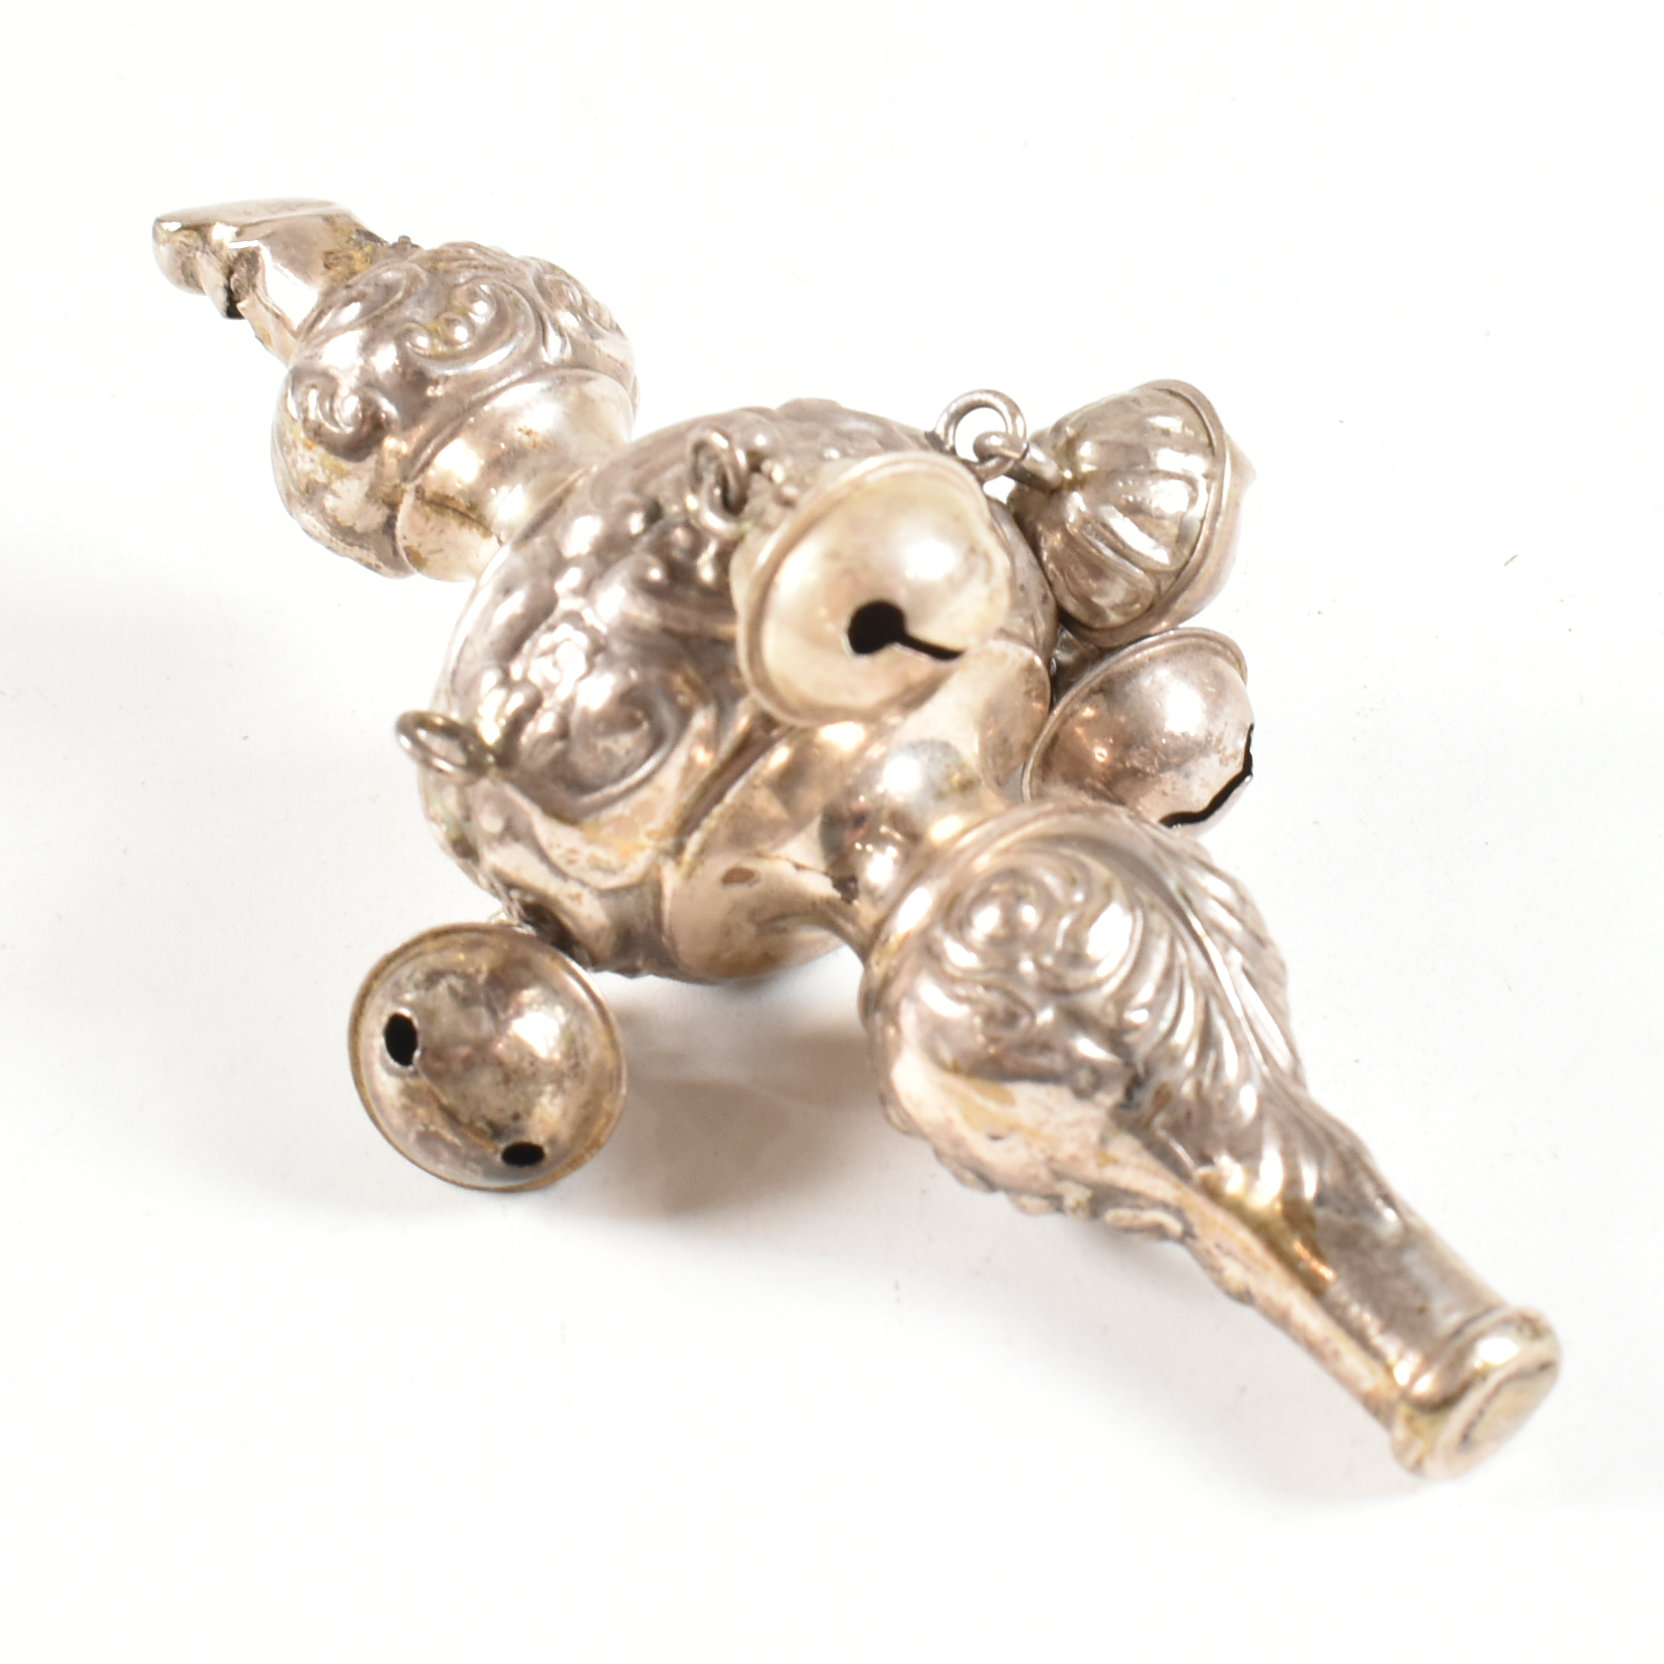 GEORGE V HALLMARKED SILVER BABYS COMBINATION RATTLE WHISTLE - Image 3 of 6